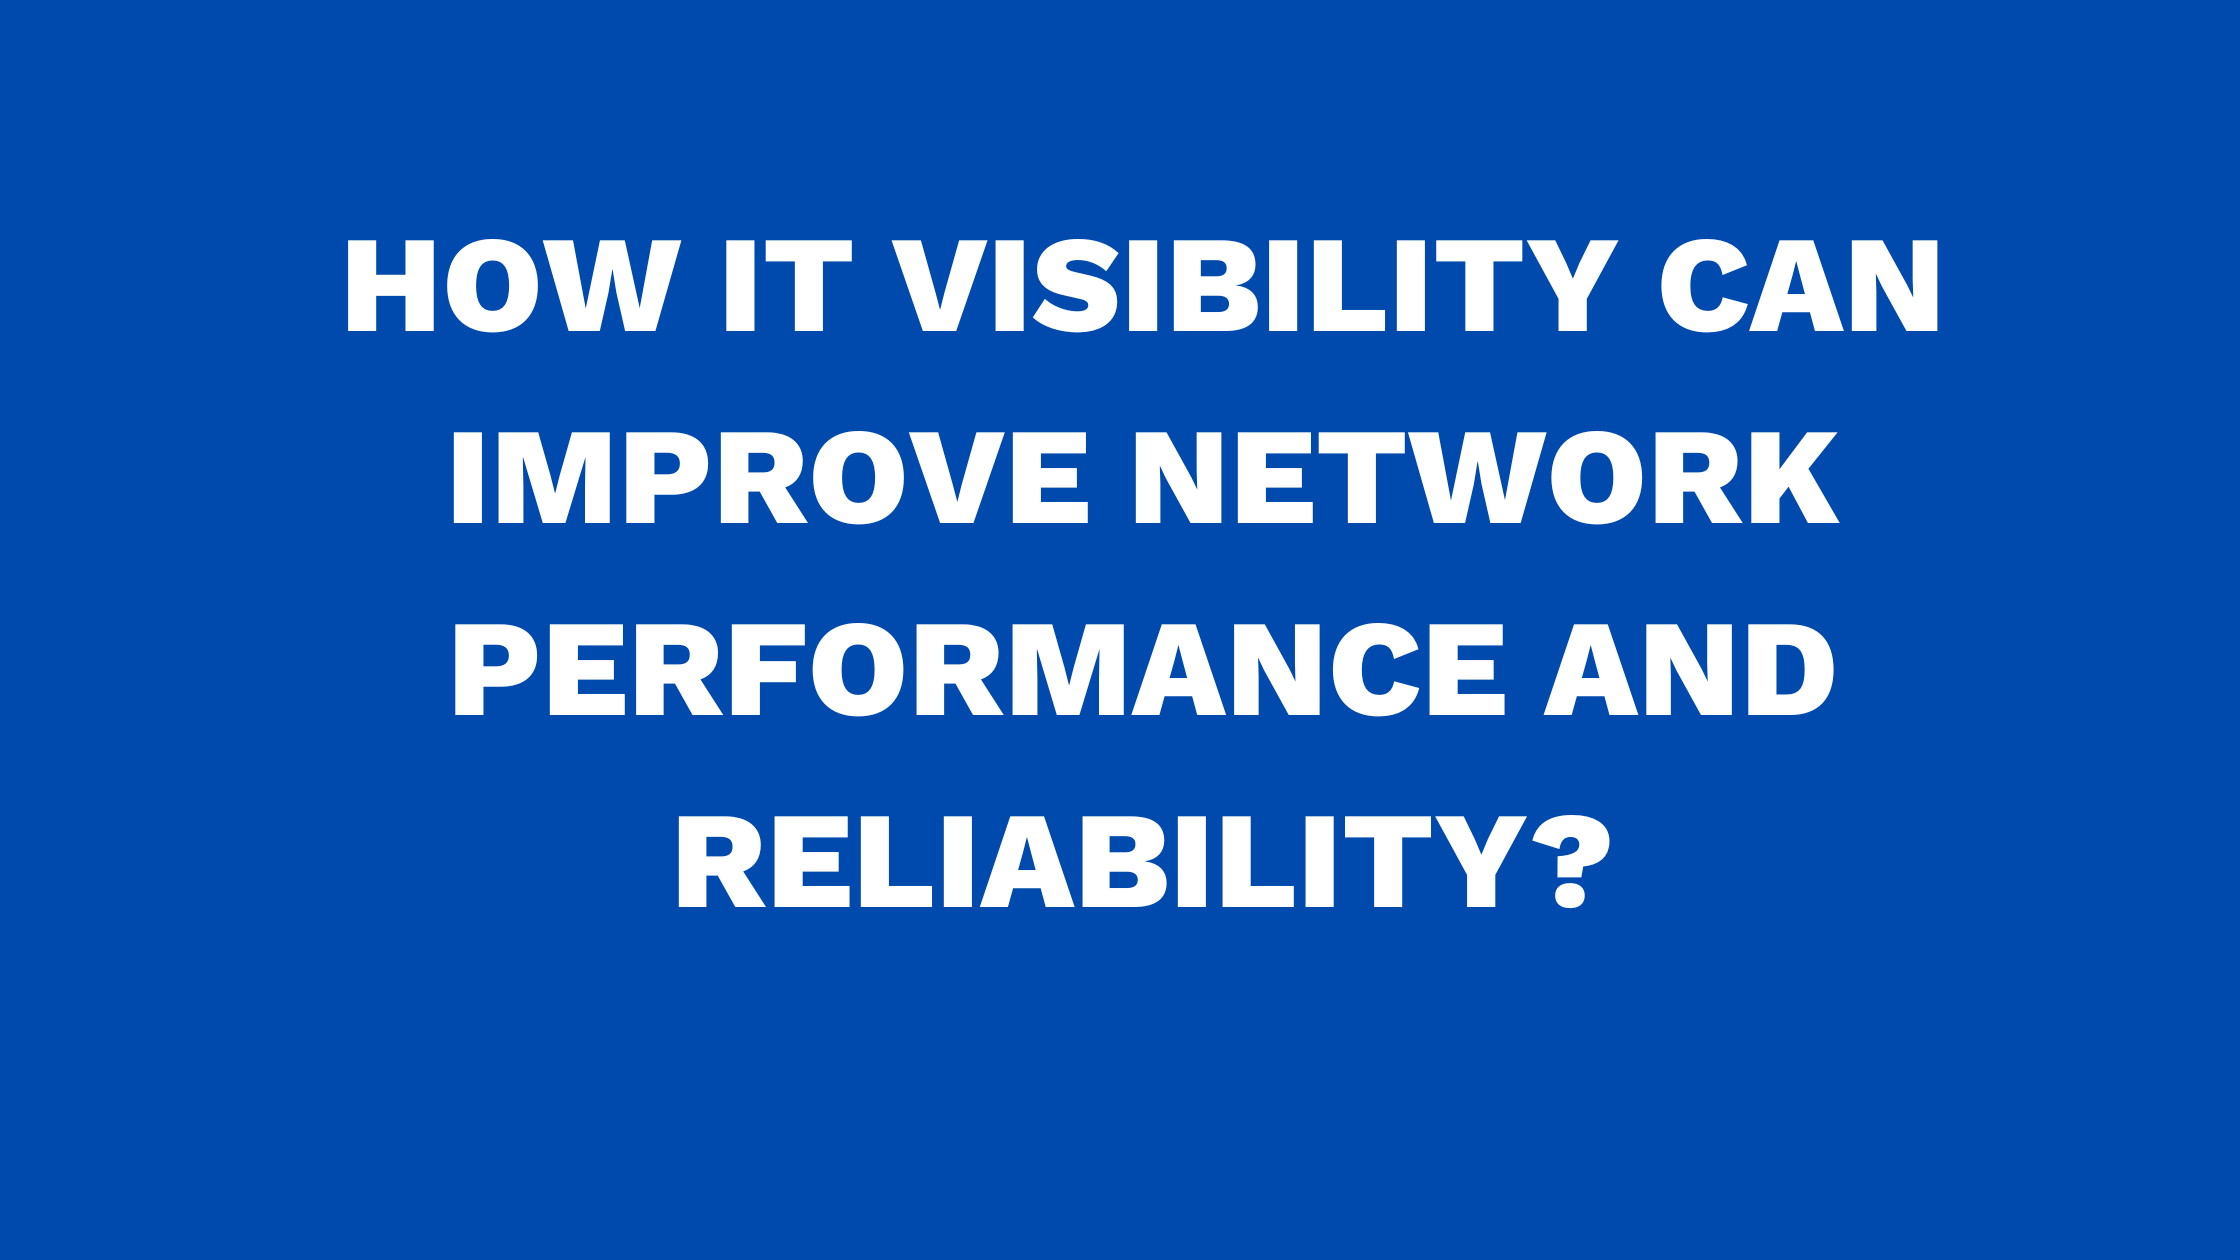 How IT Visibility can Improve Network Performance and Reliability?